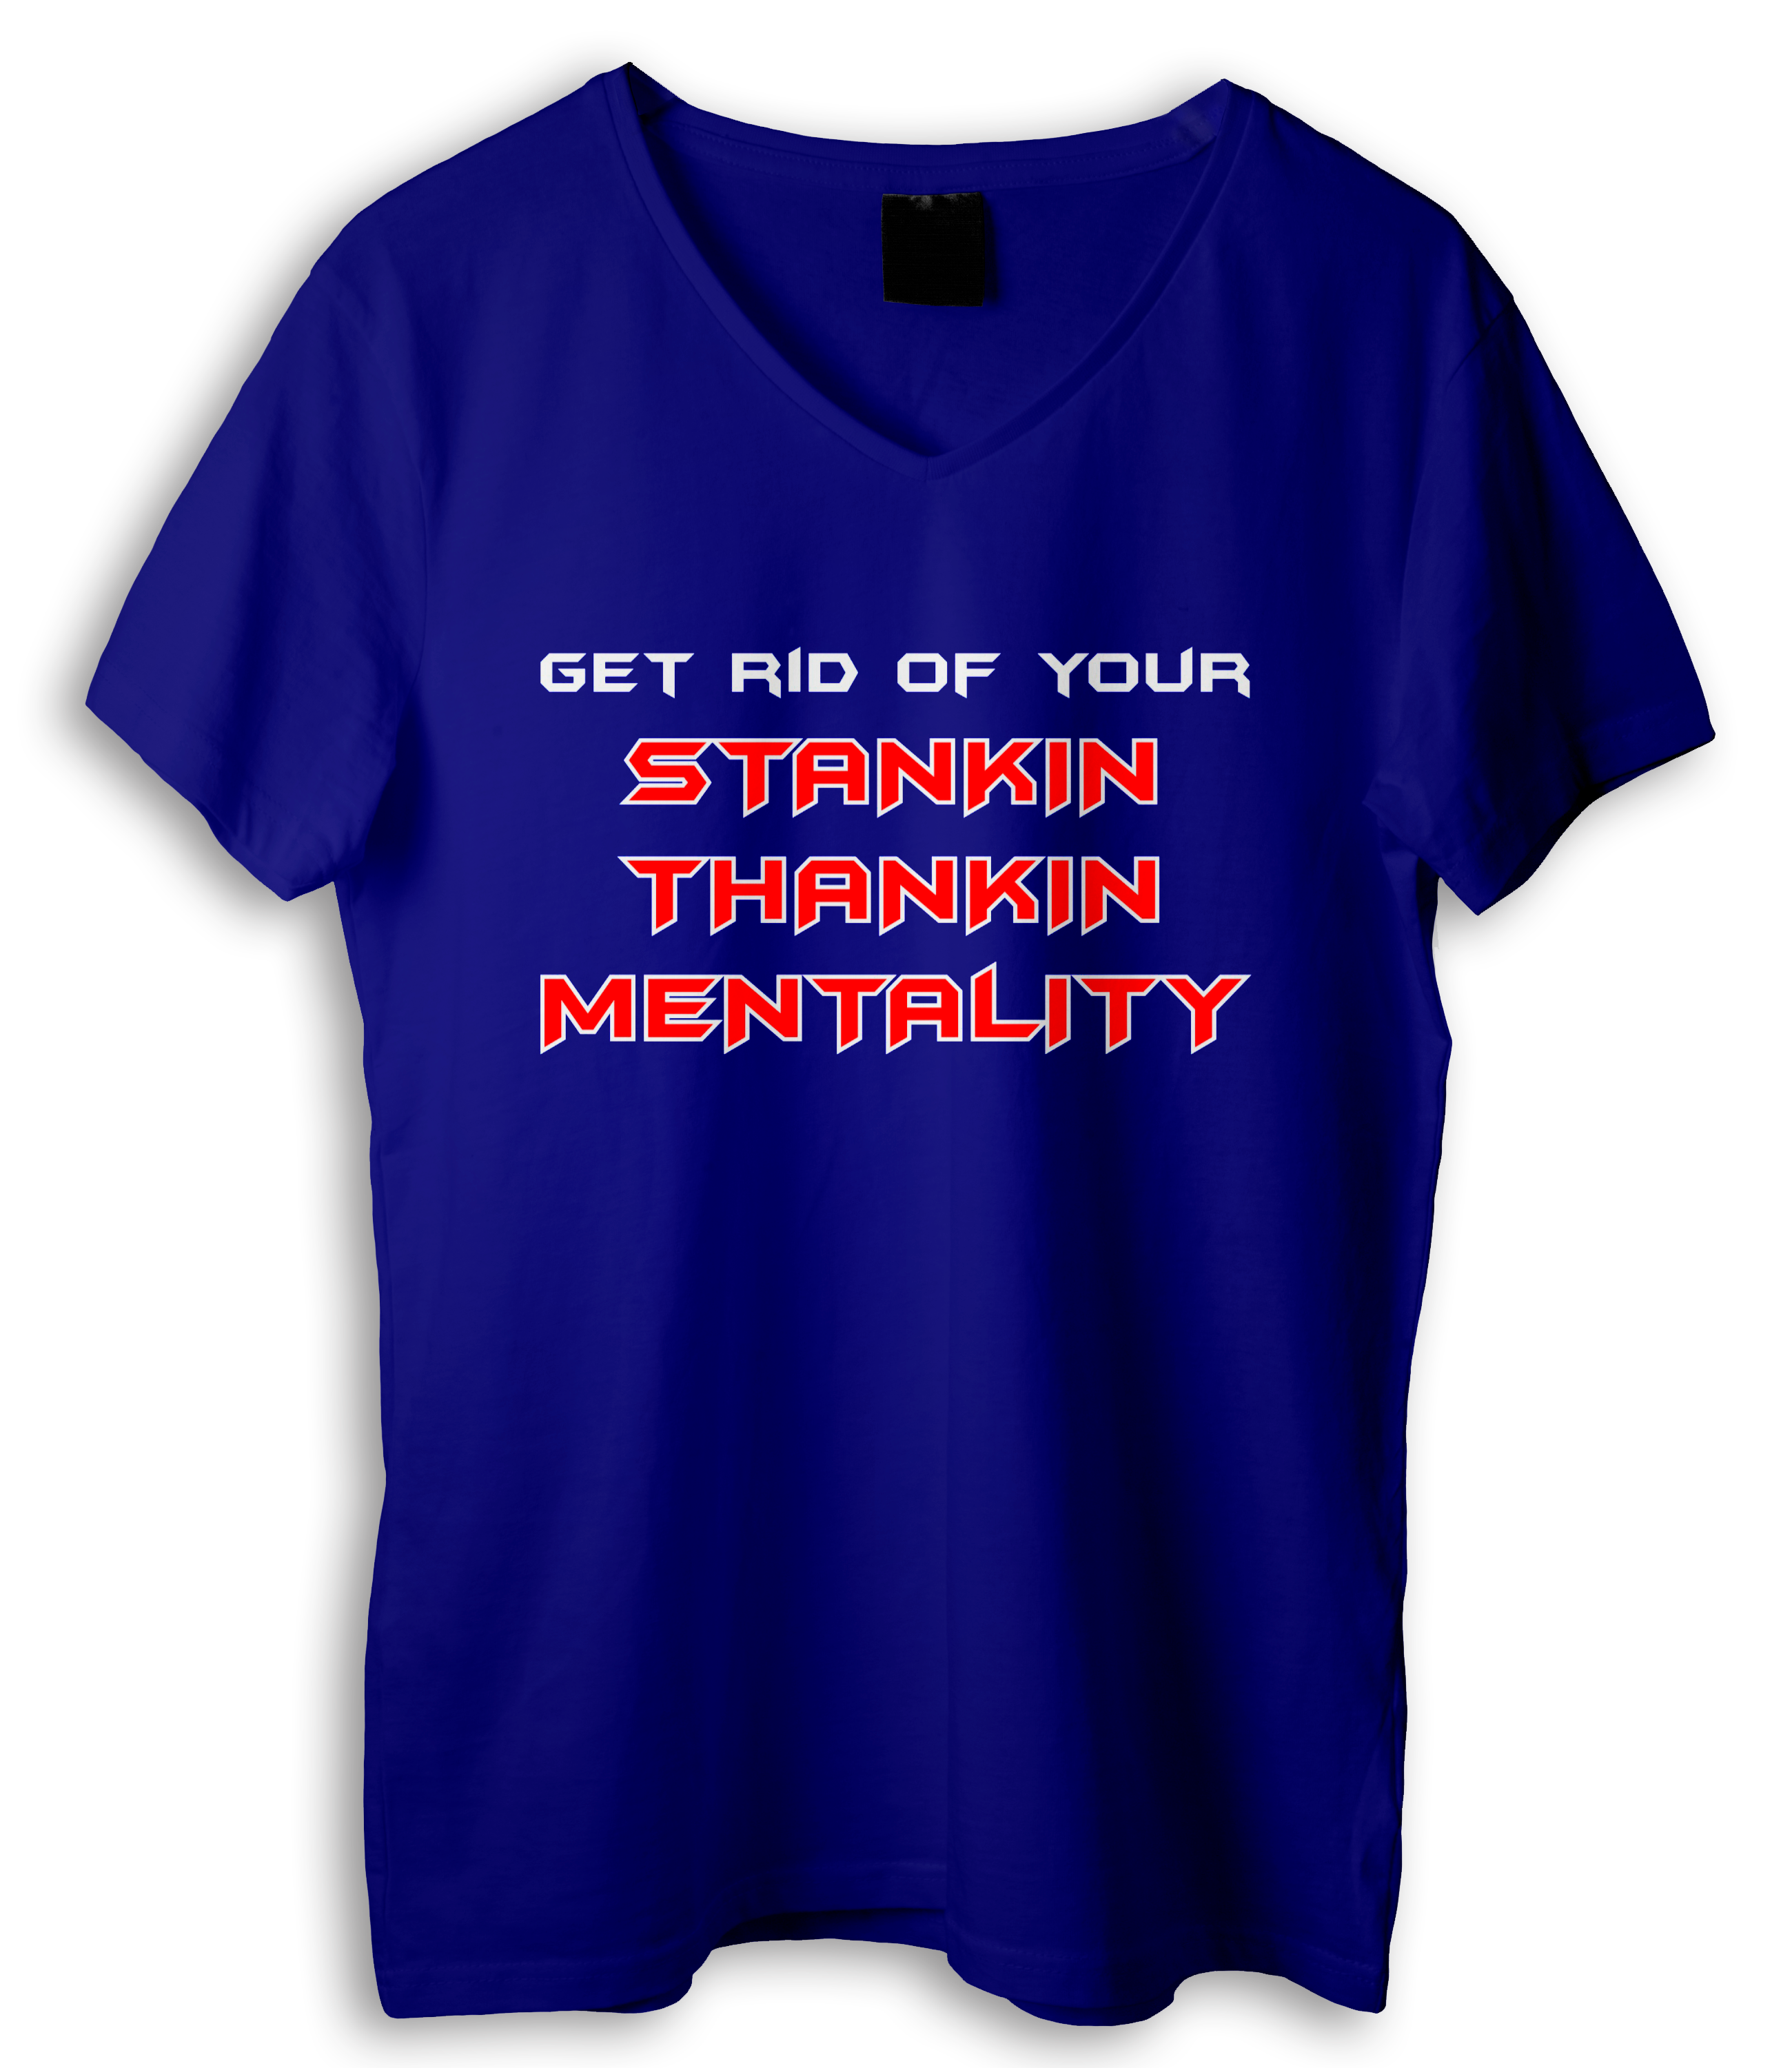 Get Rid of Your Stankin Thankin Mentality Shirt